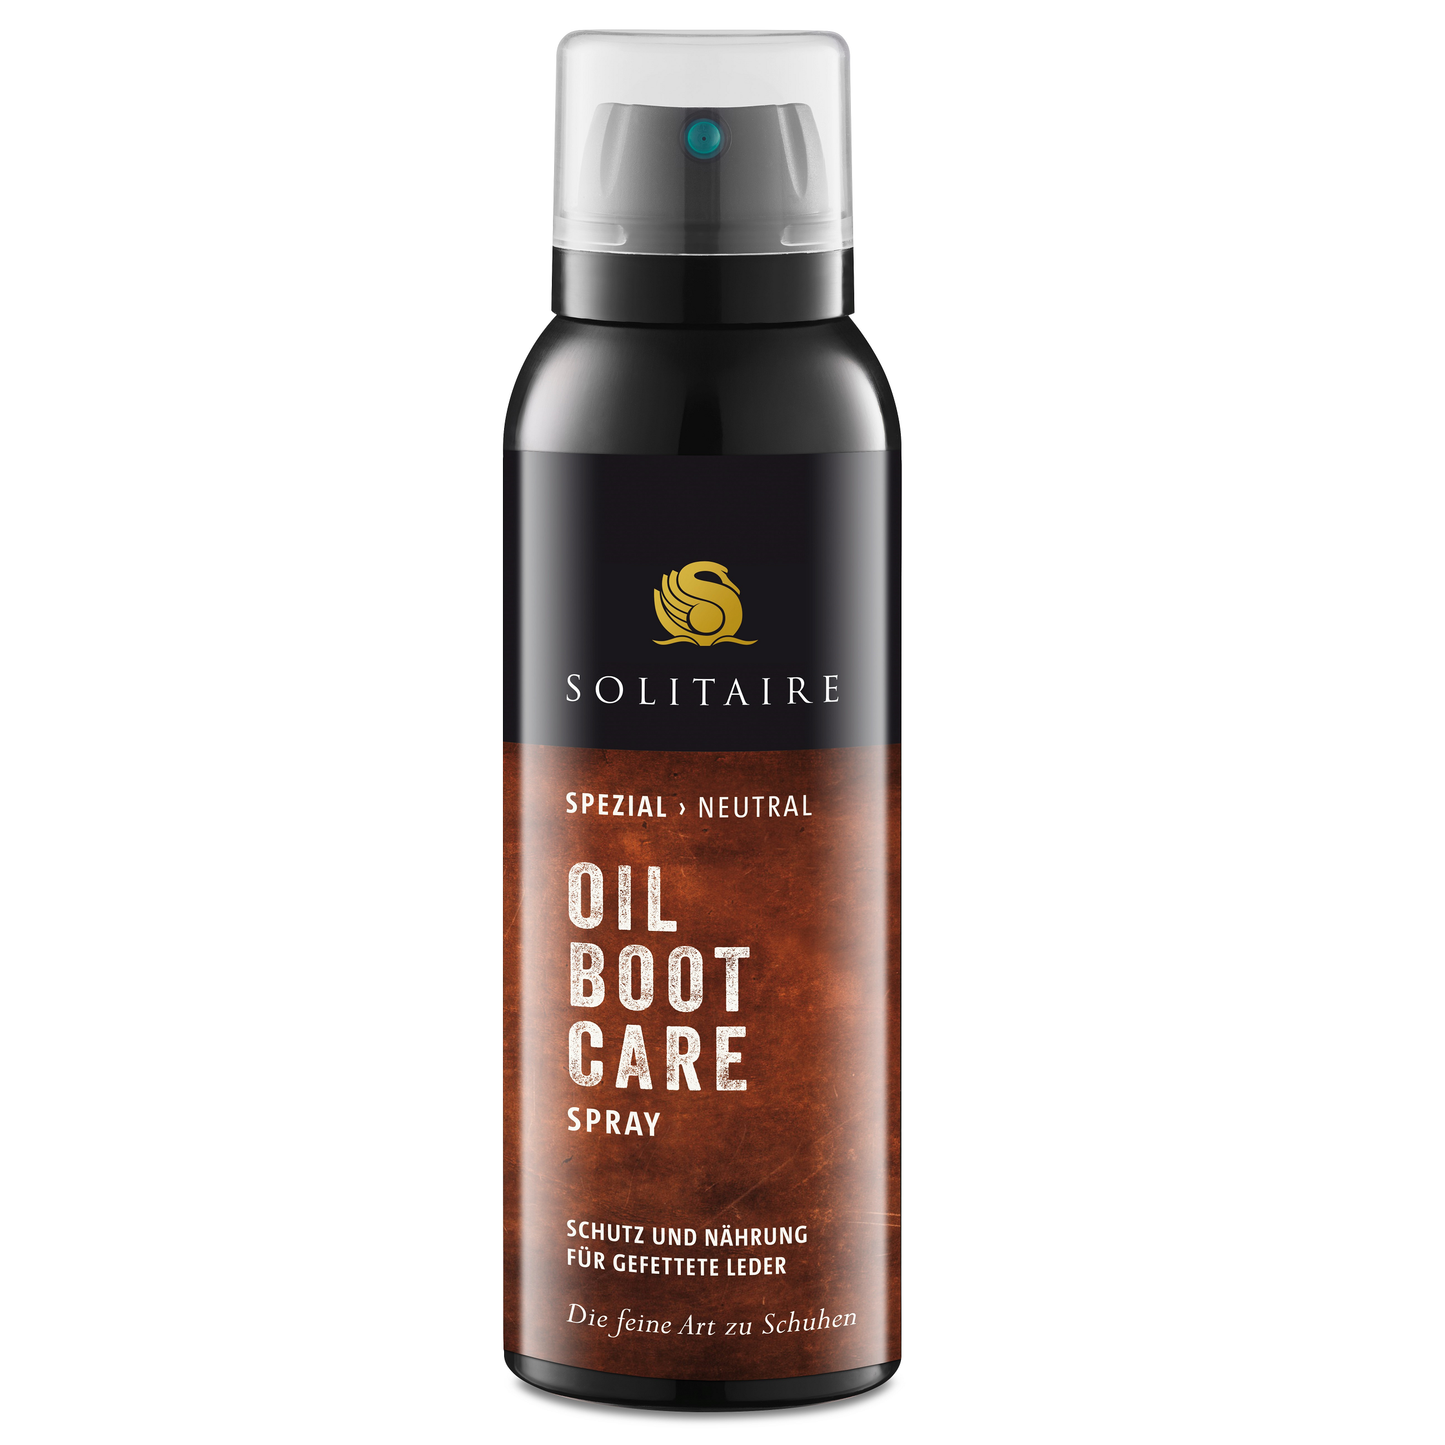 Solitaire Oil Boot Care Spray